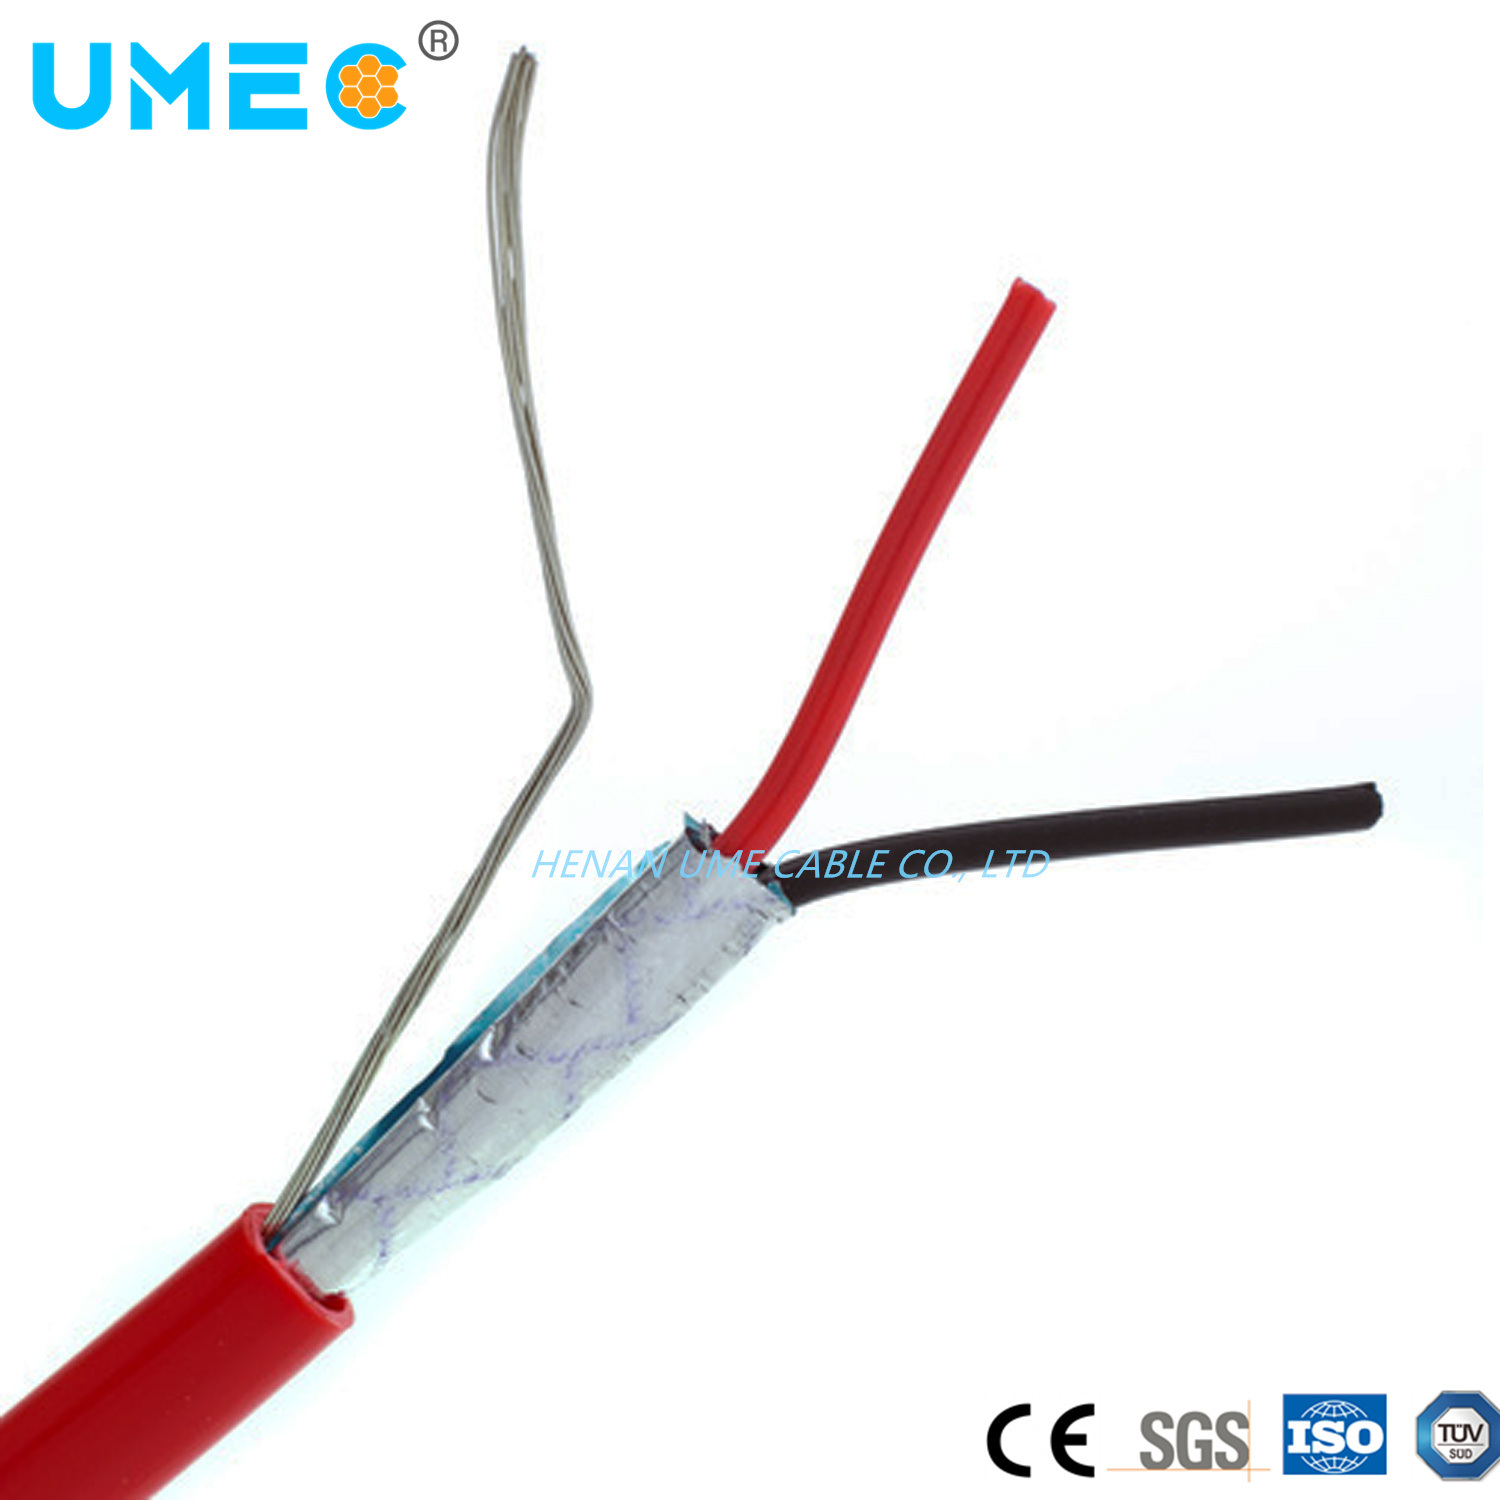 Telecom Comunication Fire Alarm Cable Wire Fire Resistance Flame Retardant Electrical Wire